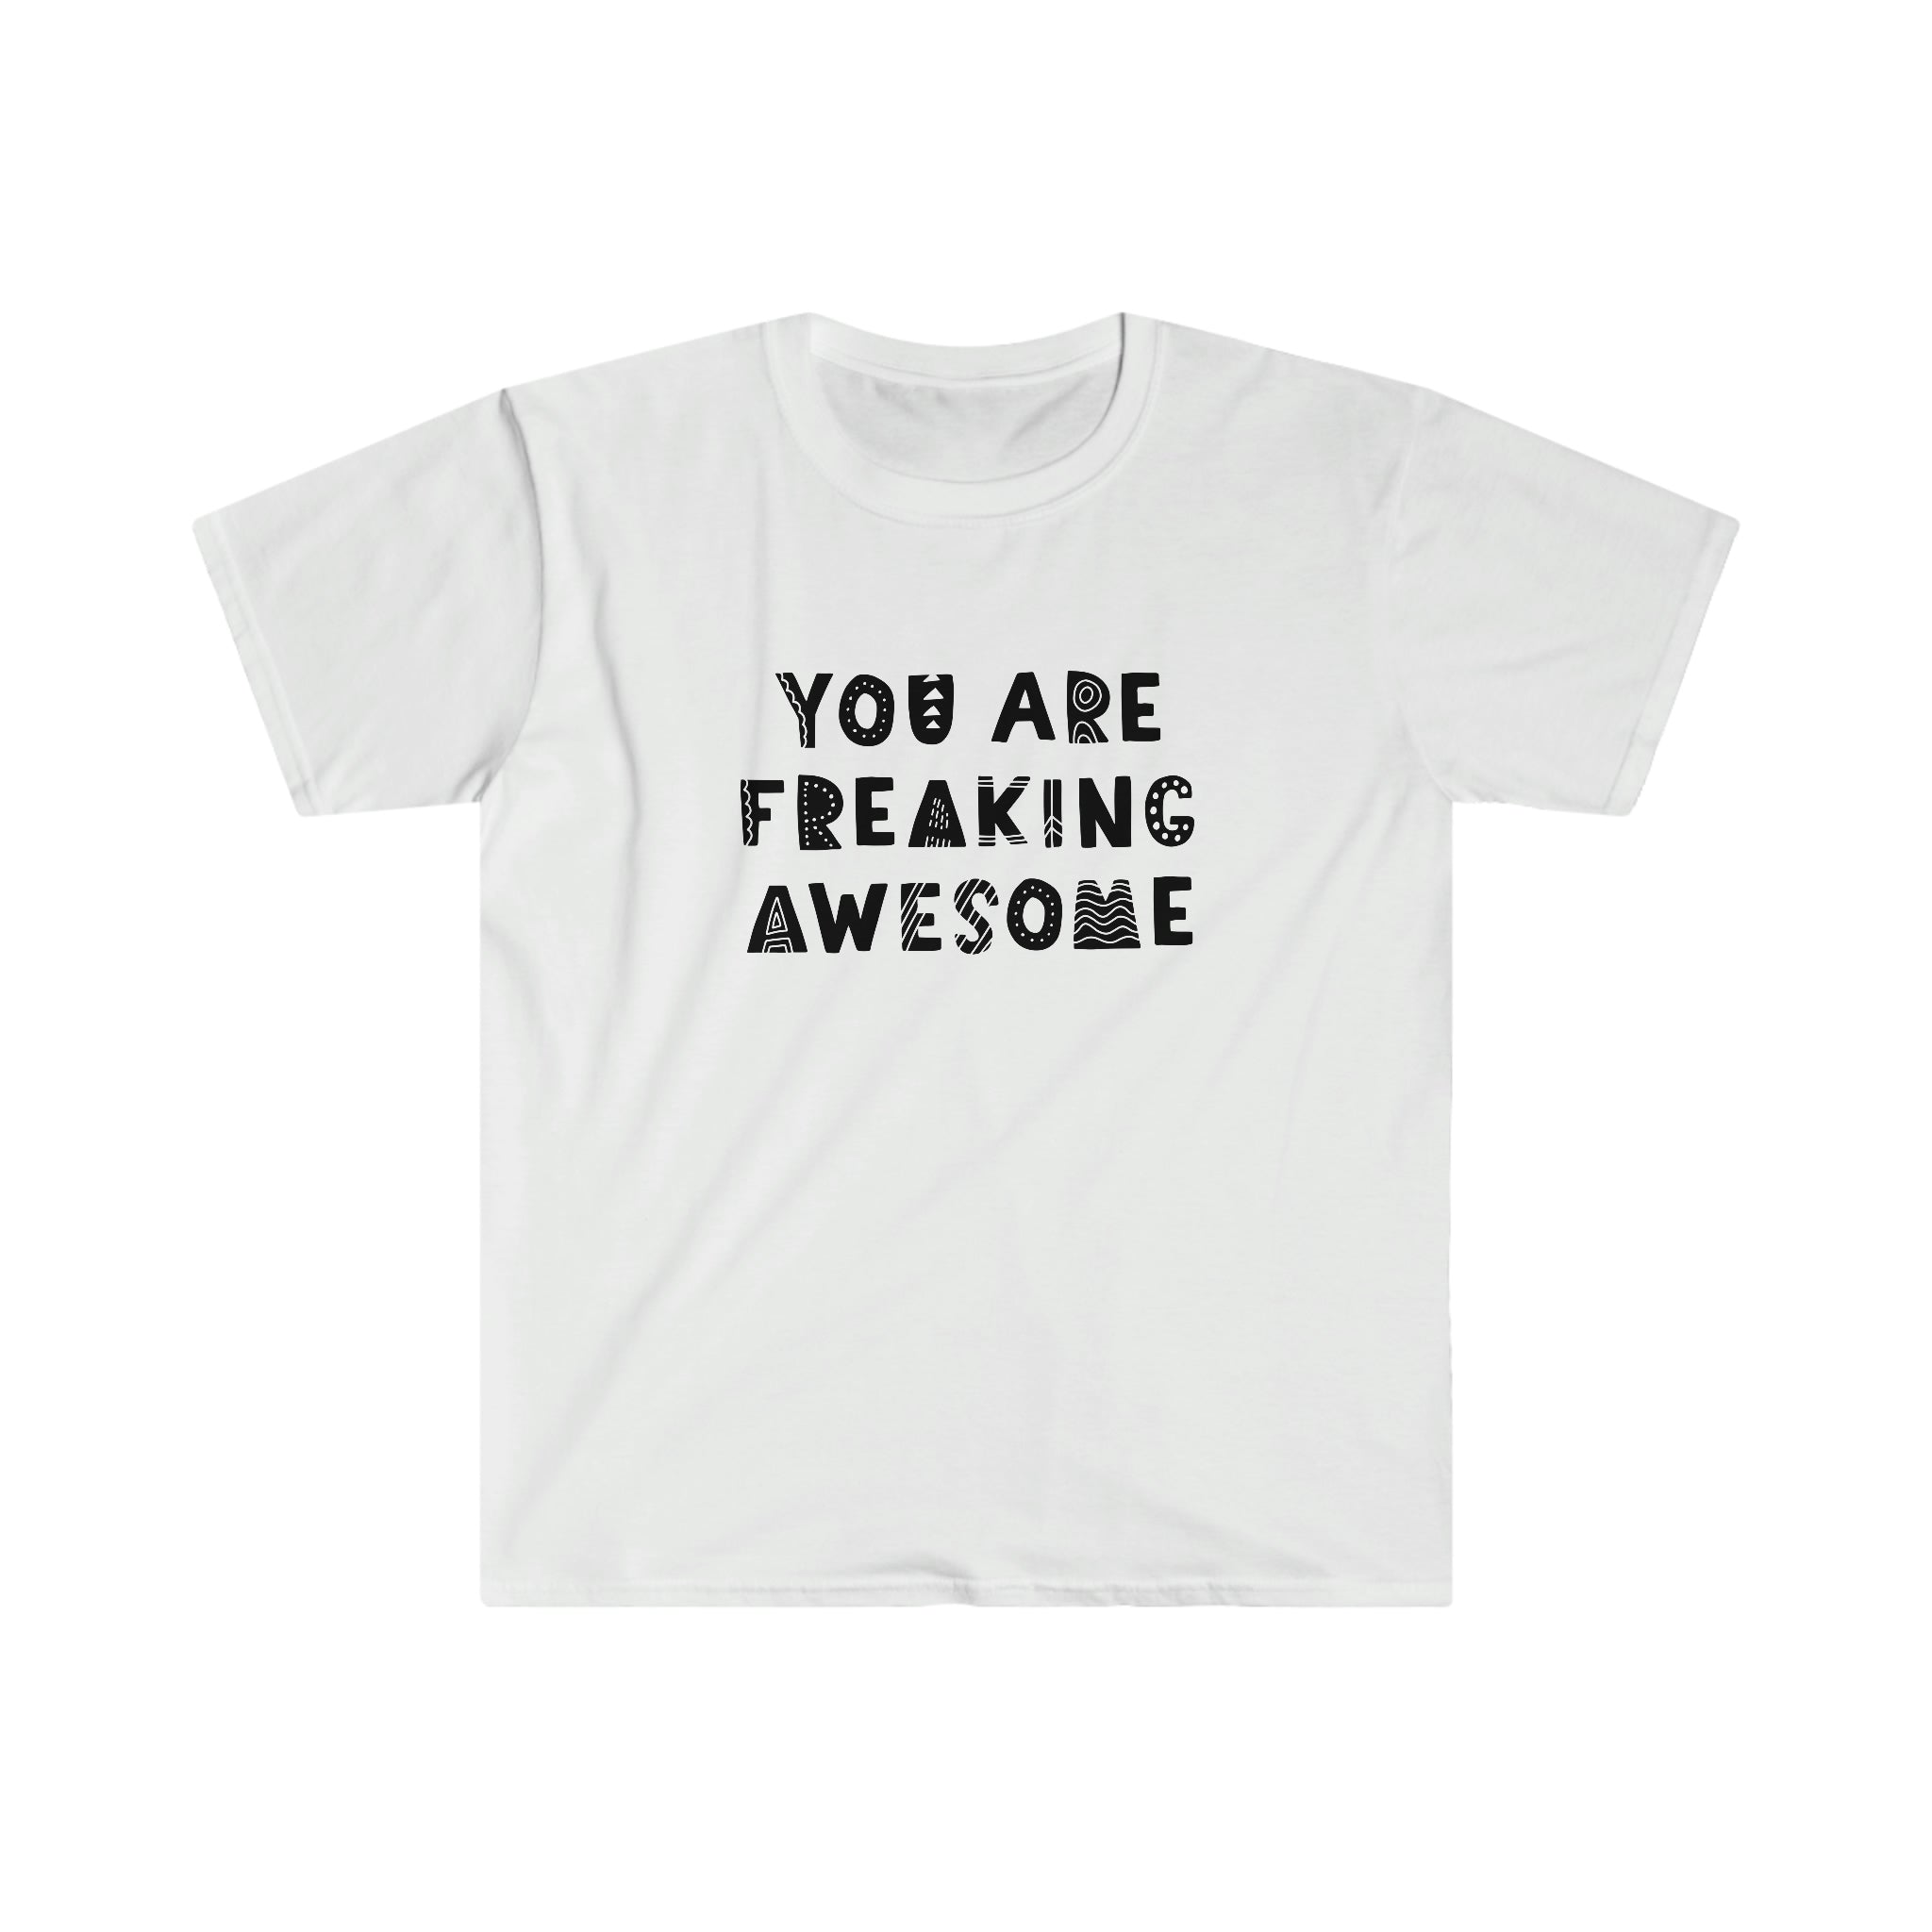 You're freaking awesome T-Shirt